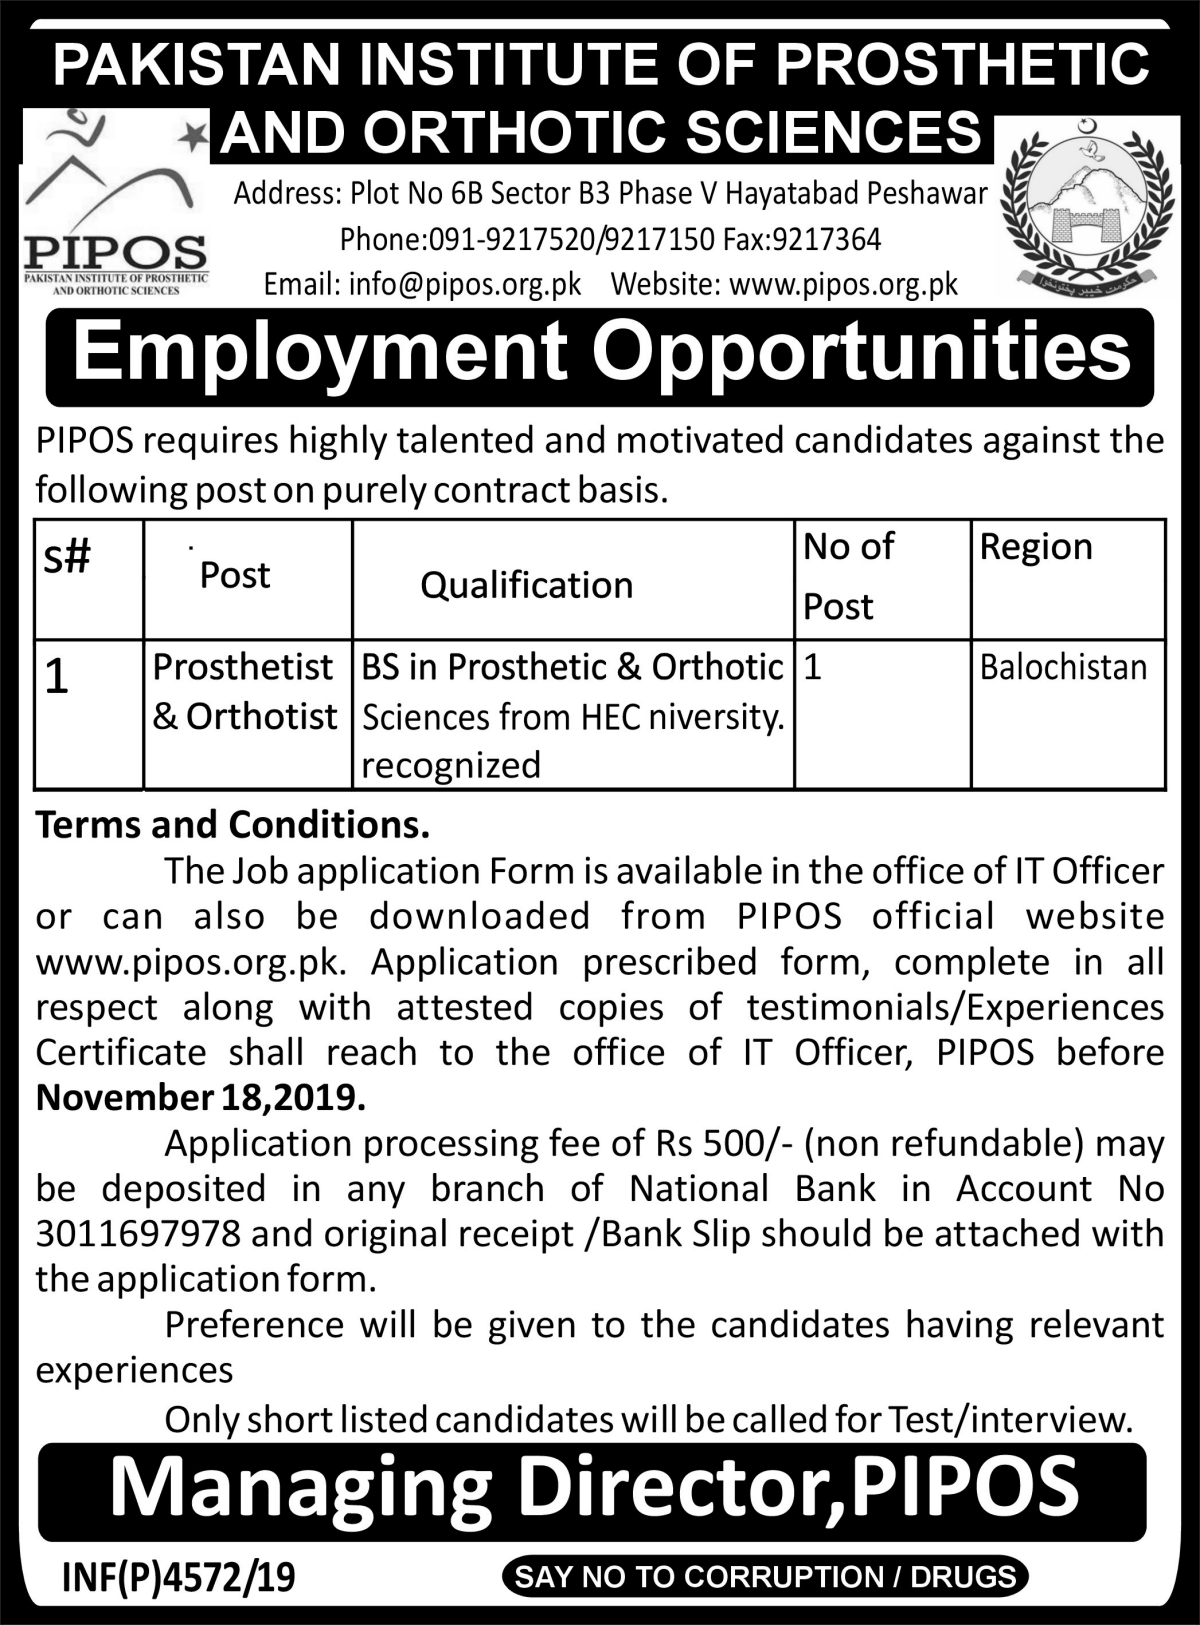 Jobs In Pakistan Institute of Prosthetic And Orthotic Science 01 November 2019